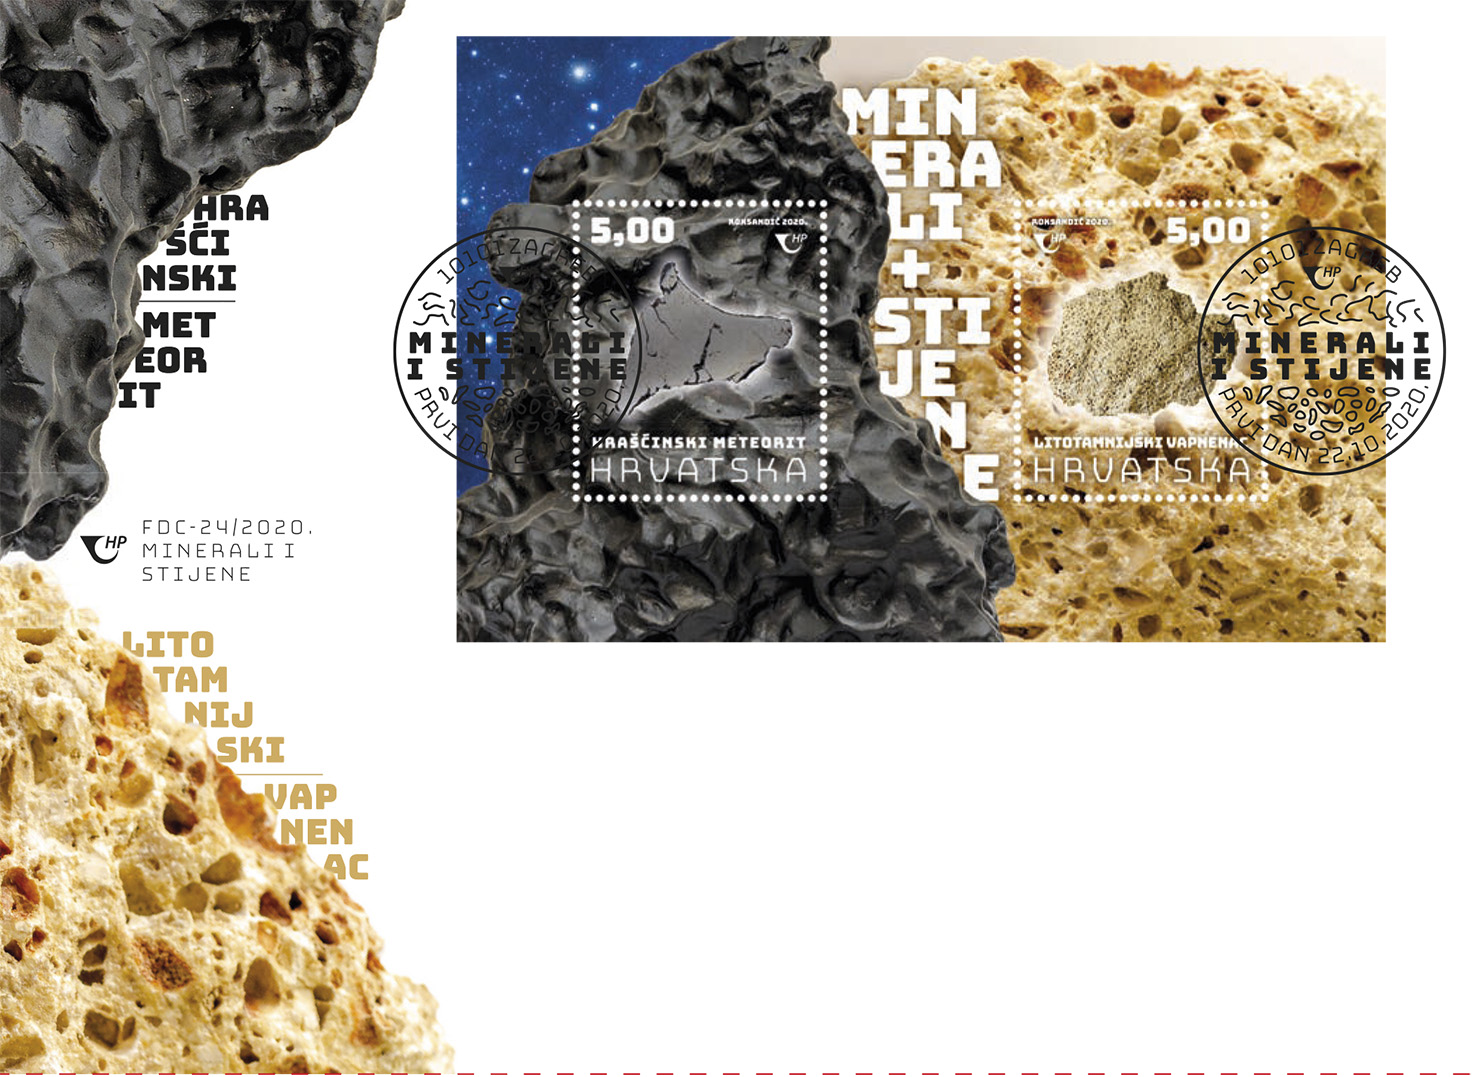 FDC - PORTUGAL FIRST DAY COVER CONGRESS HISPANO-LUSO-AMERICANO DE GEOLOGIA  ECONOMICA - GEOLOGY MINERAL STAMP